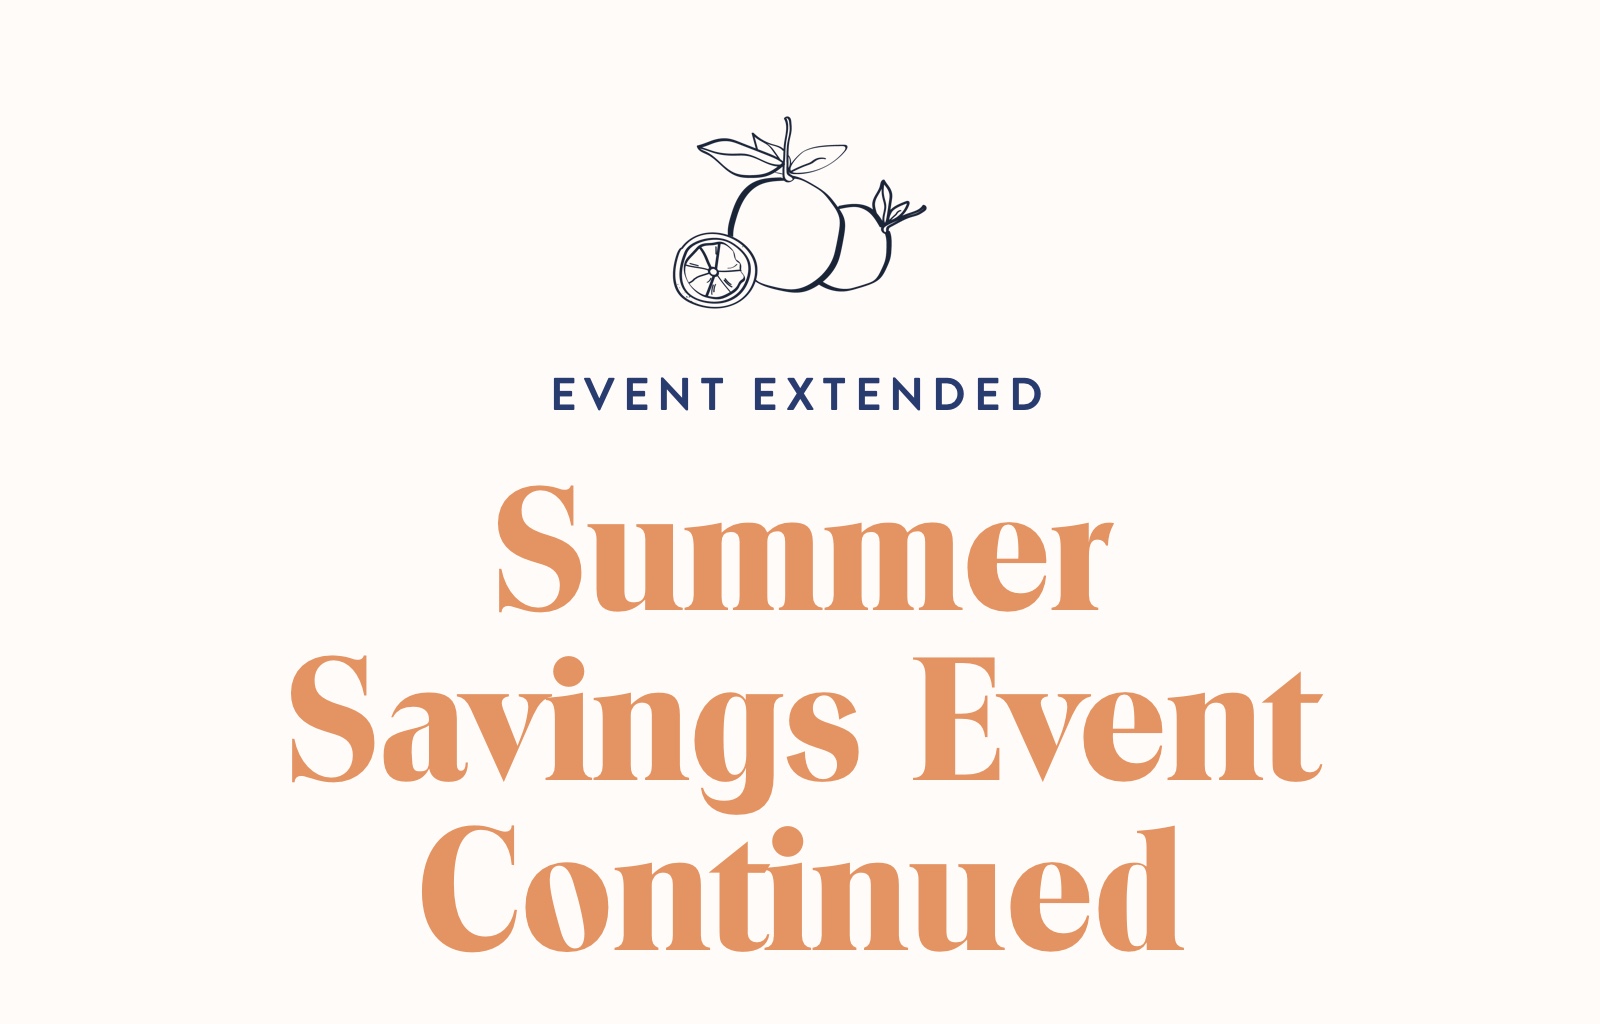 Our Summer Savings Event Has Been Extended